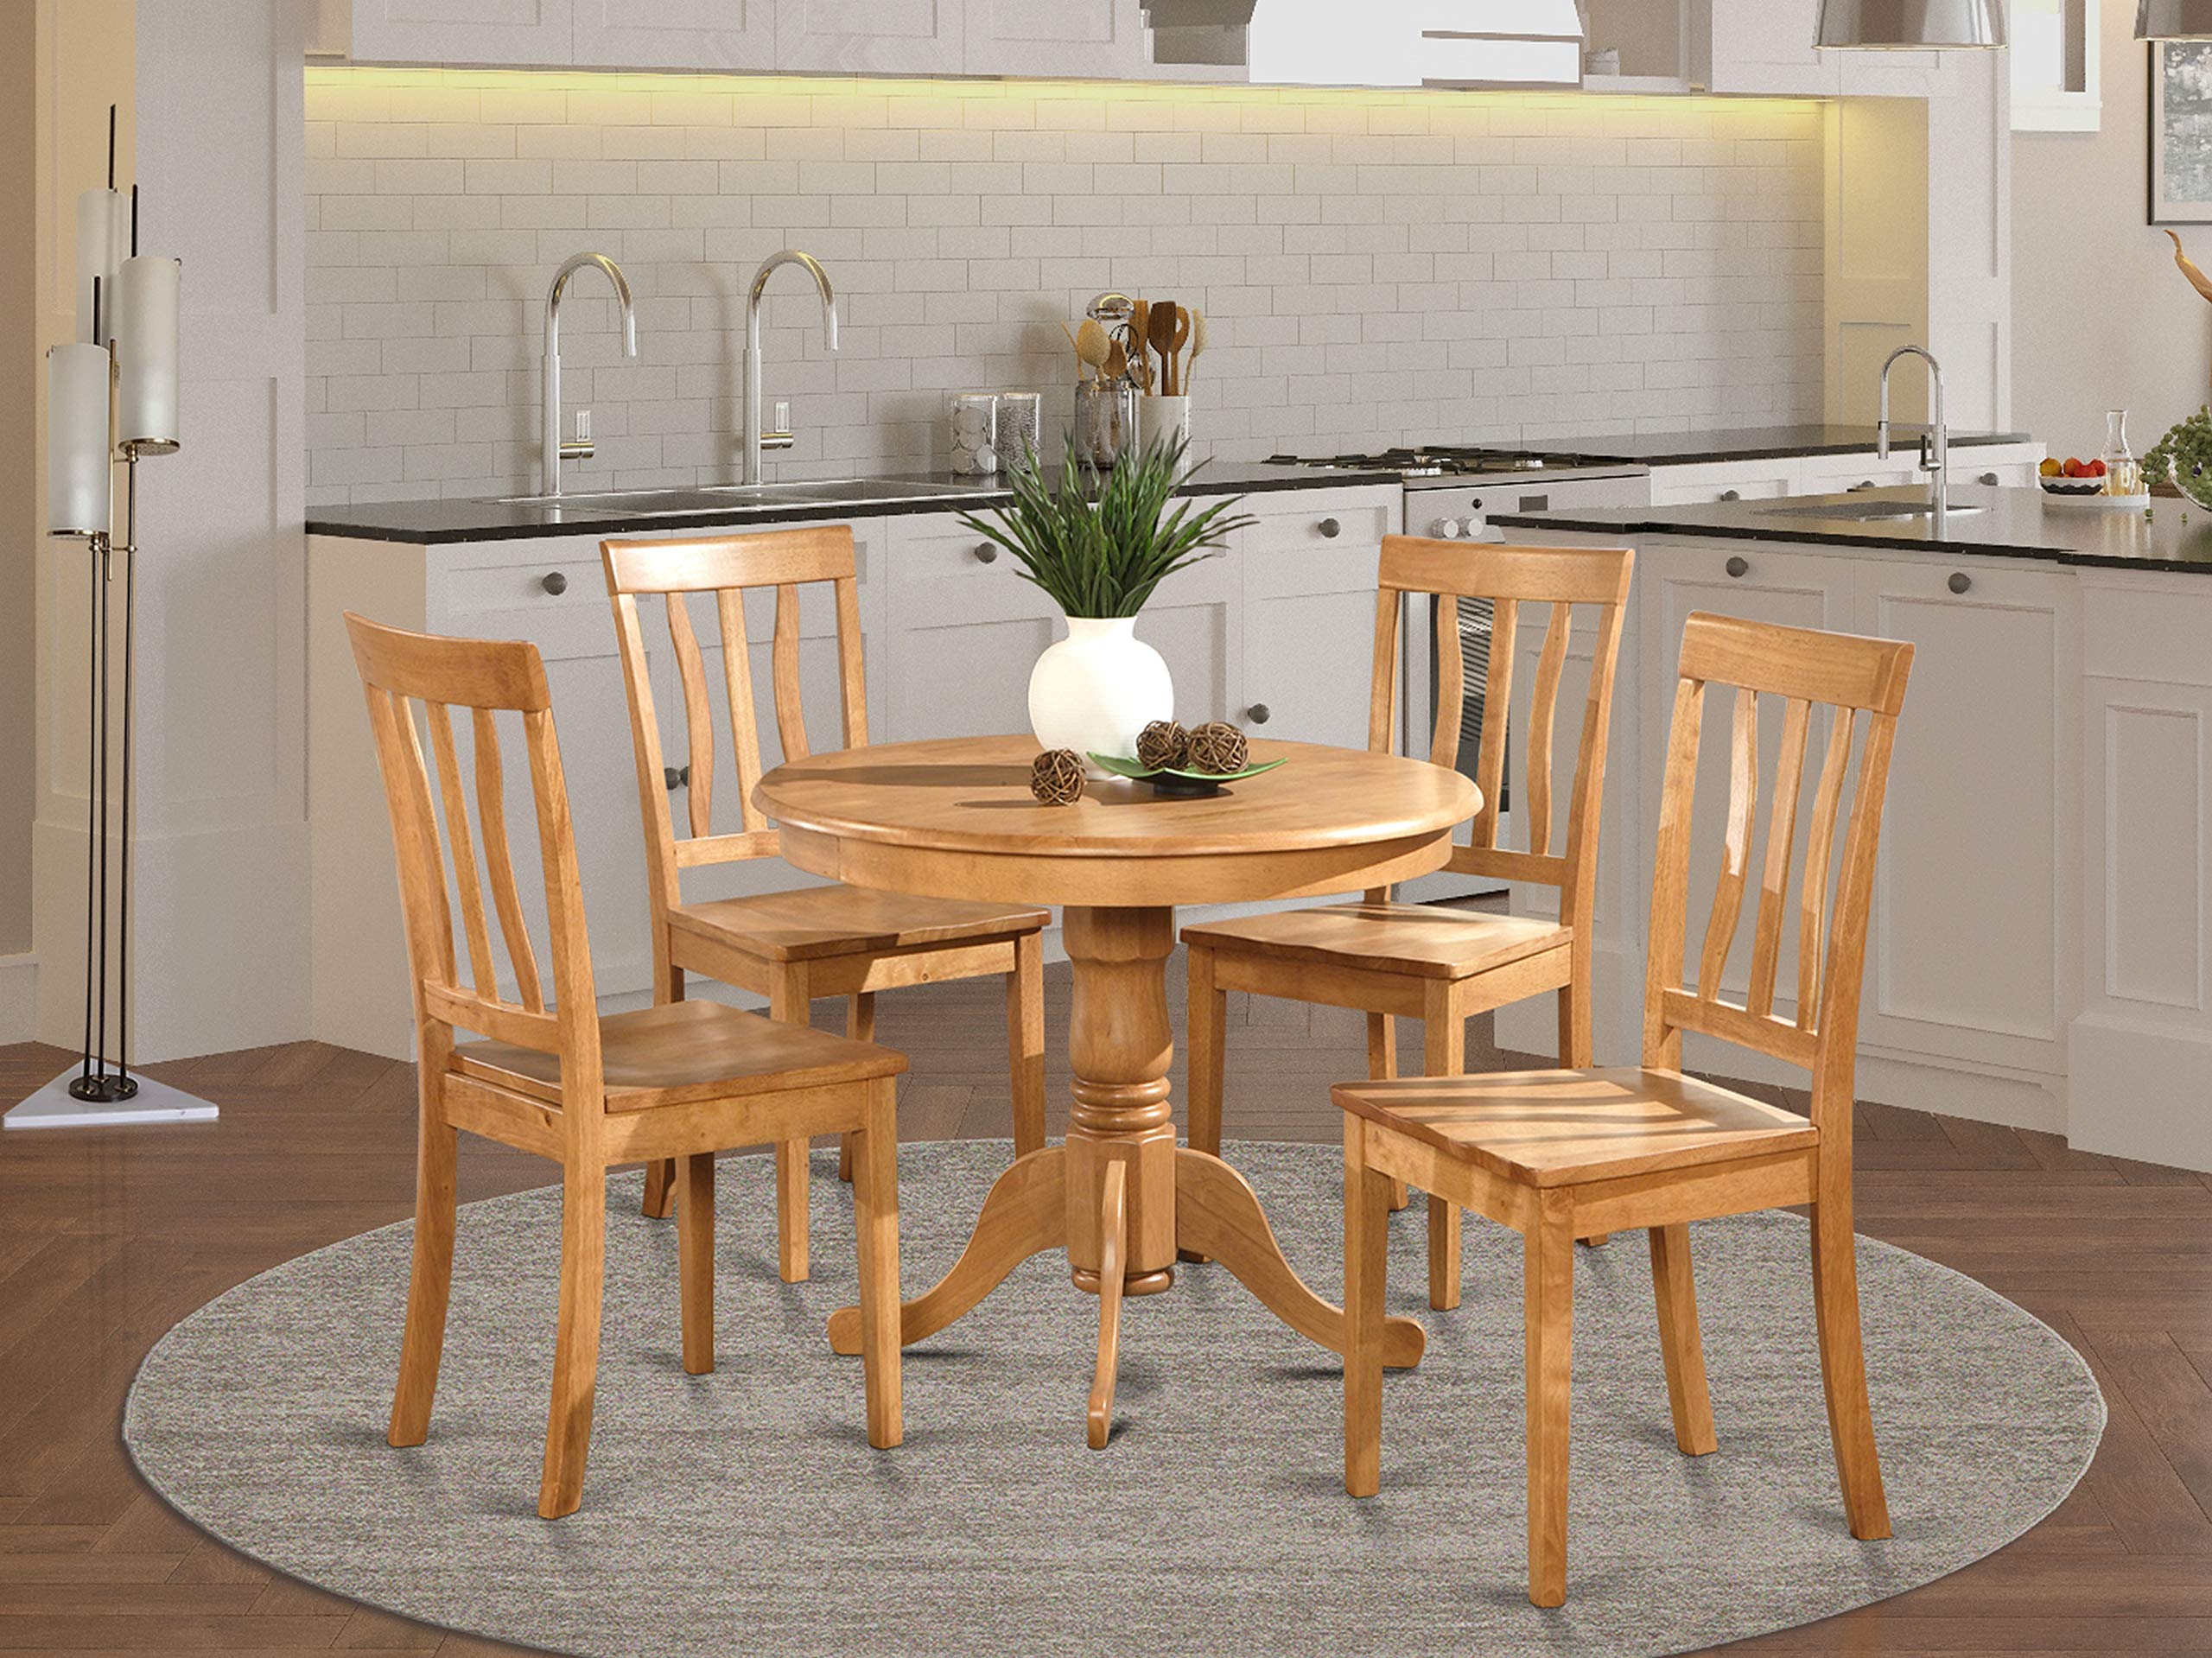 Oak dining table with 4 modern chairs